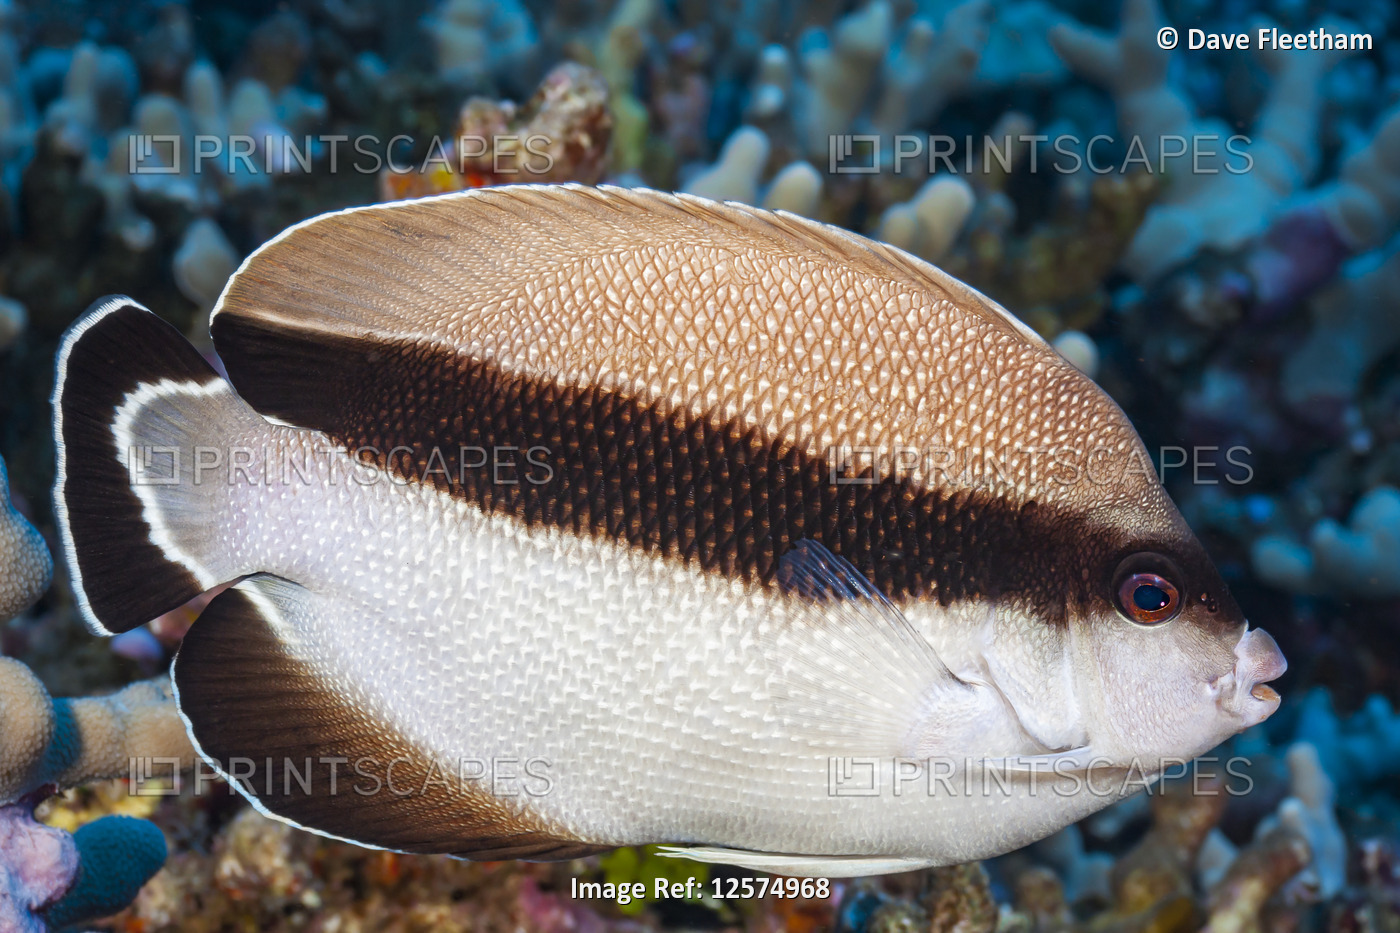 Bandit angelfish (Holacanthus arcuatus) are found only in Hawaii. In the ...